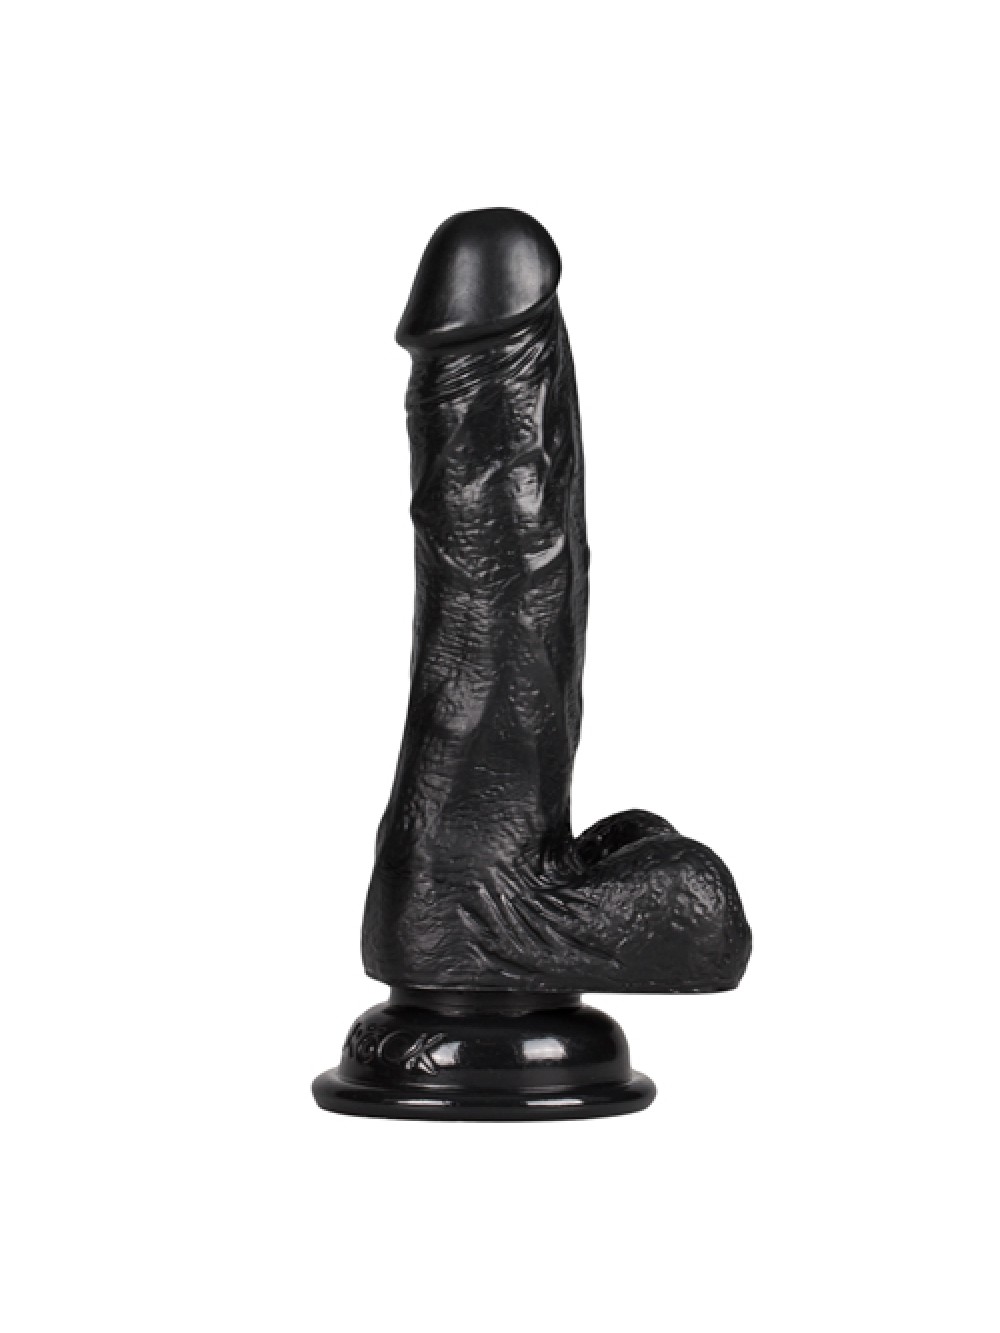 Realistic 8 Inch Dildo With Strap-On Harness